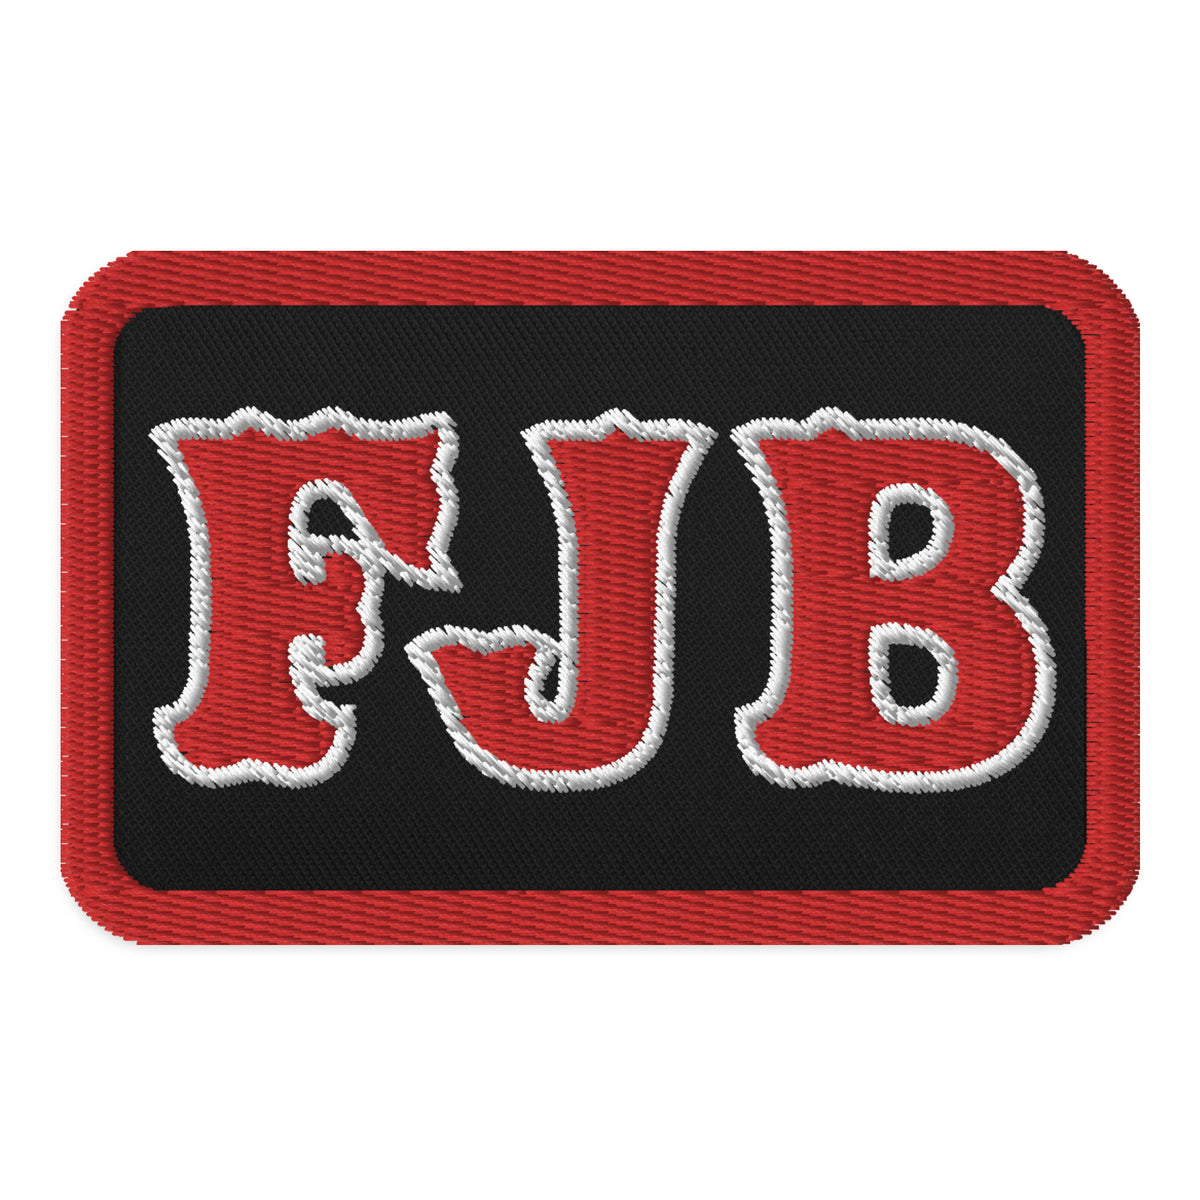 FJB Rectangle Embroidered Patch